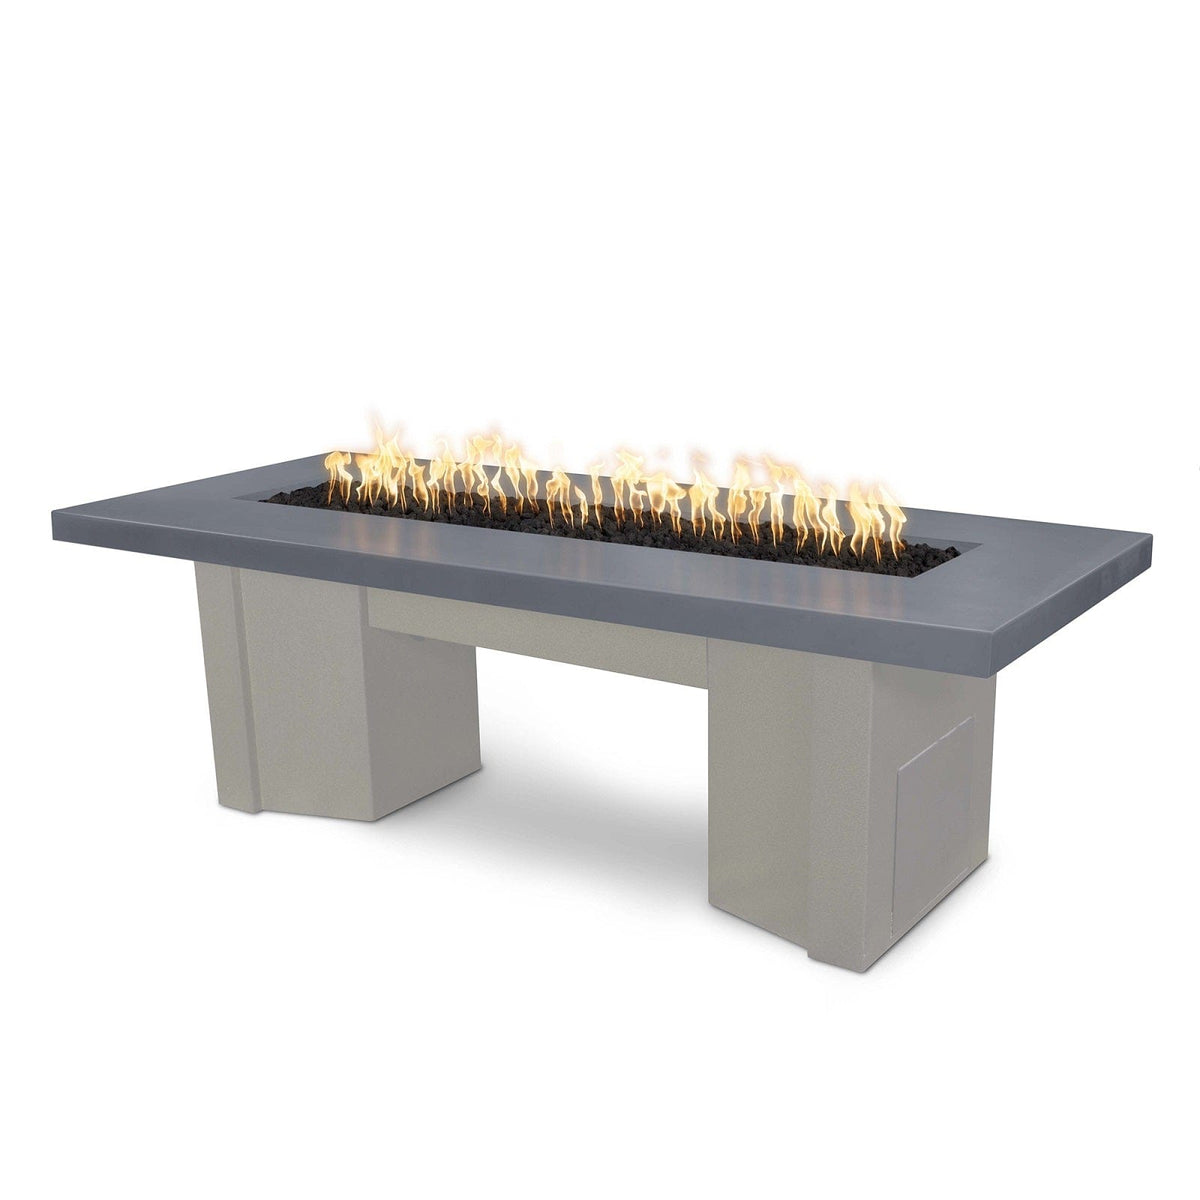 The Outdoor Plus Fire Features Gray (-GRY) / Pewter Powder Coated Steel (-PEW) The Outdoor Plus 60&quot; Alameda Fire Table Smooth Concrete in Natural Gas - Match Lit / OPT-ALMGFRC60-NG